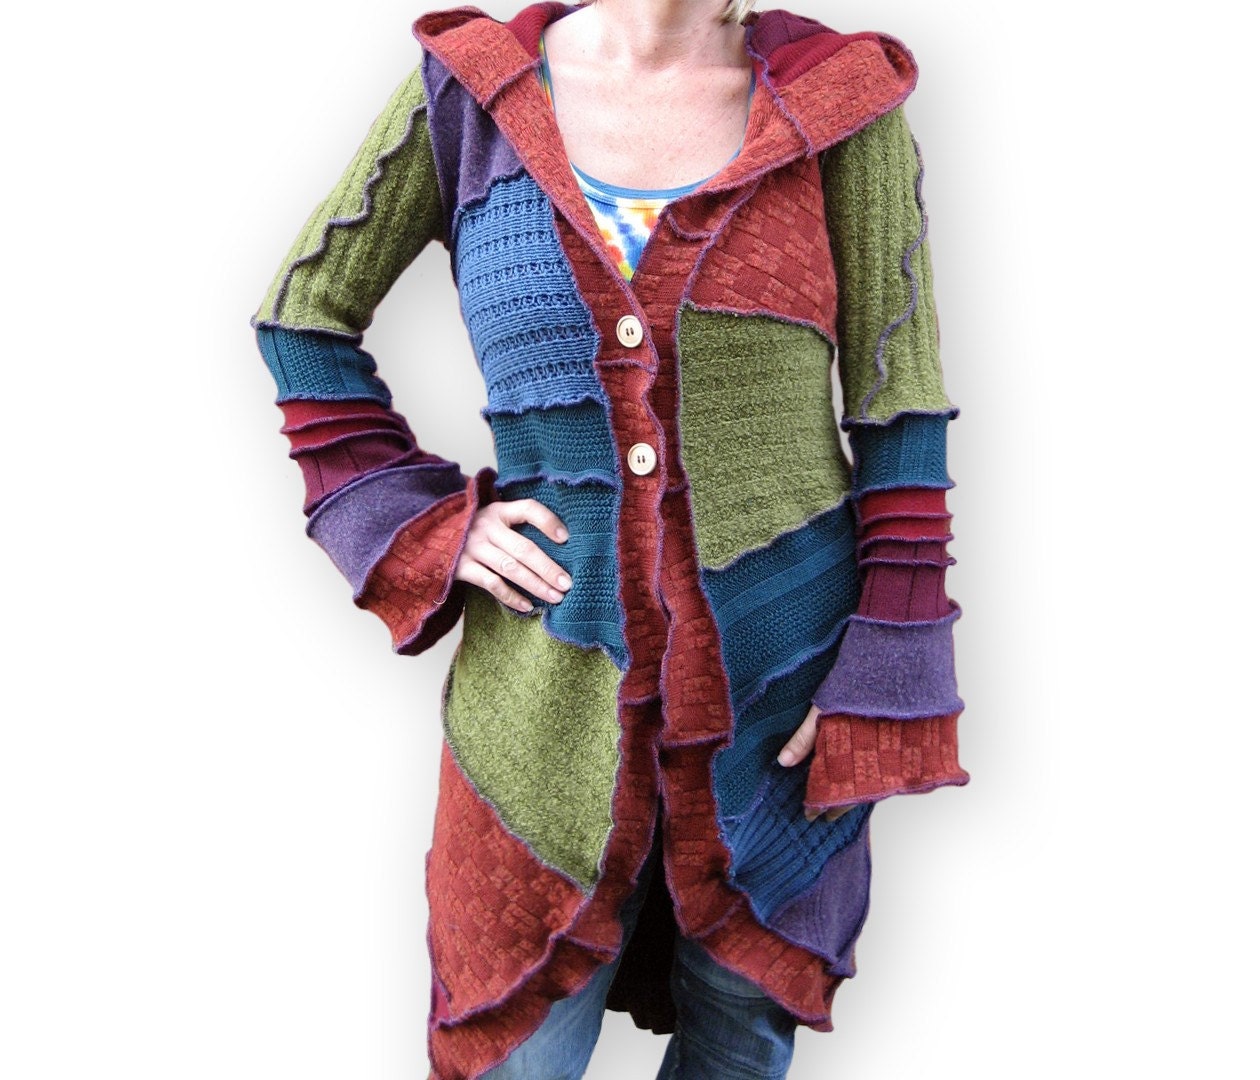 RESERVED FOR SANDYCOPE - Earthy Rainbow and Peace - S/M - Pinwheel Long Cardi Creation - Made from Recycled Sweaters